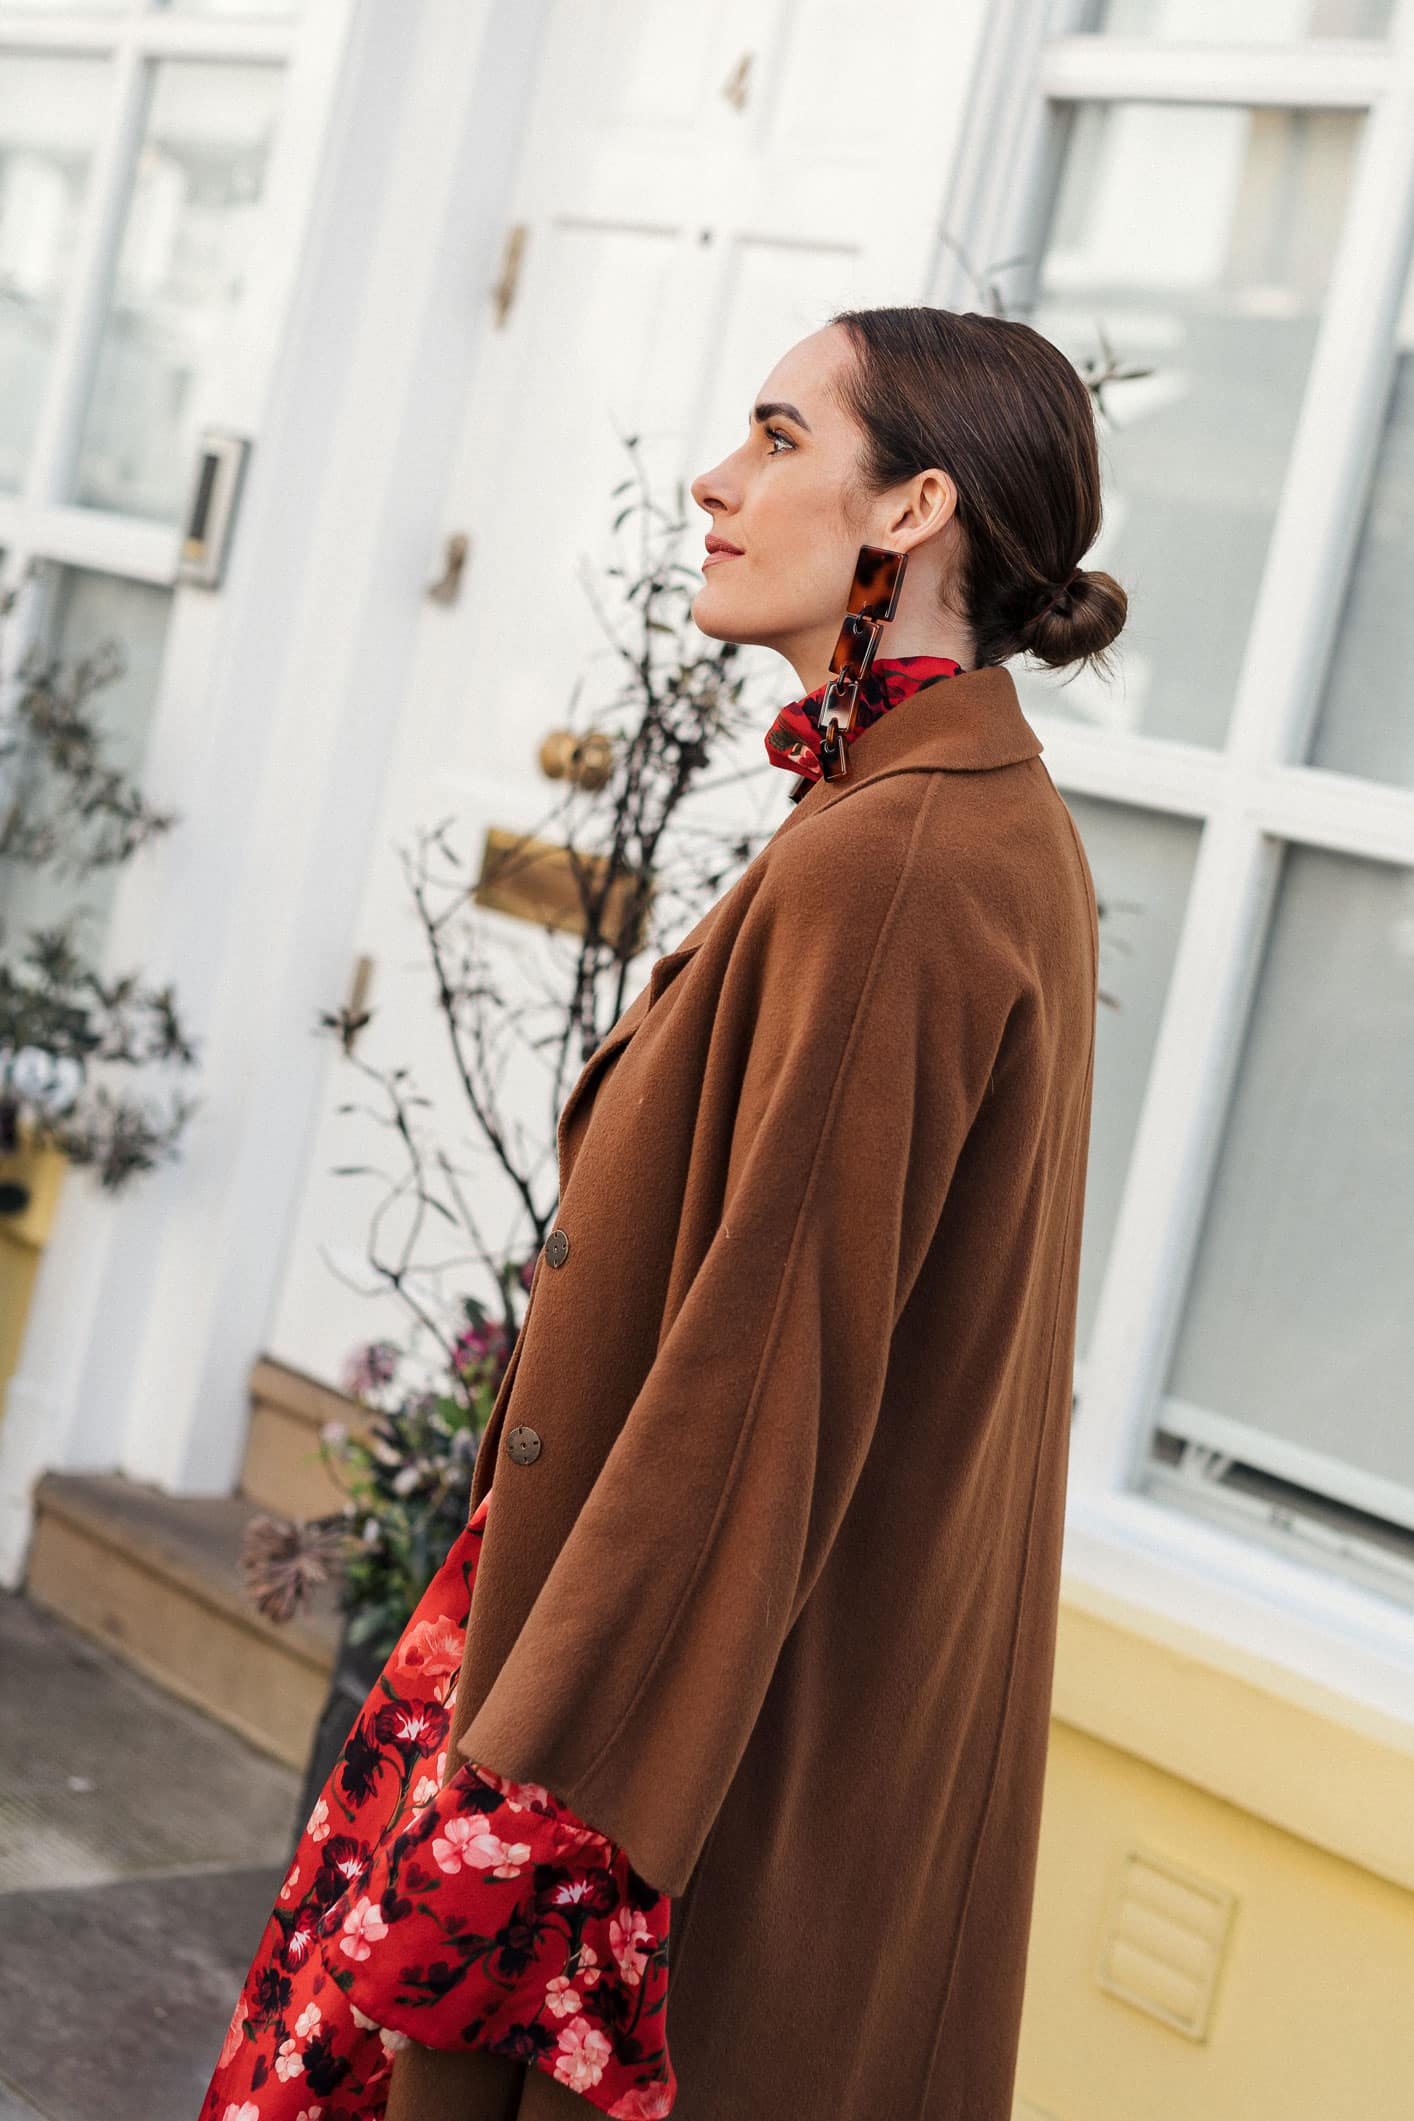 Louise Roe of Front Roe chooses her favourite summer earrings